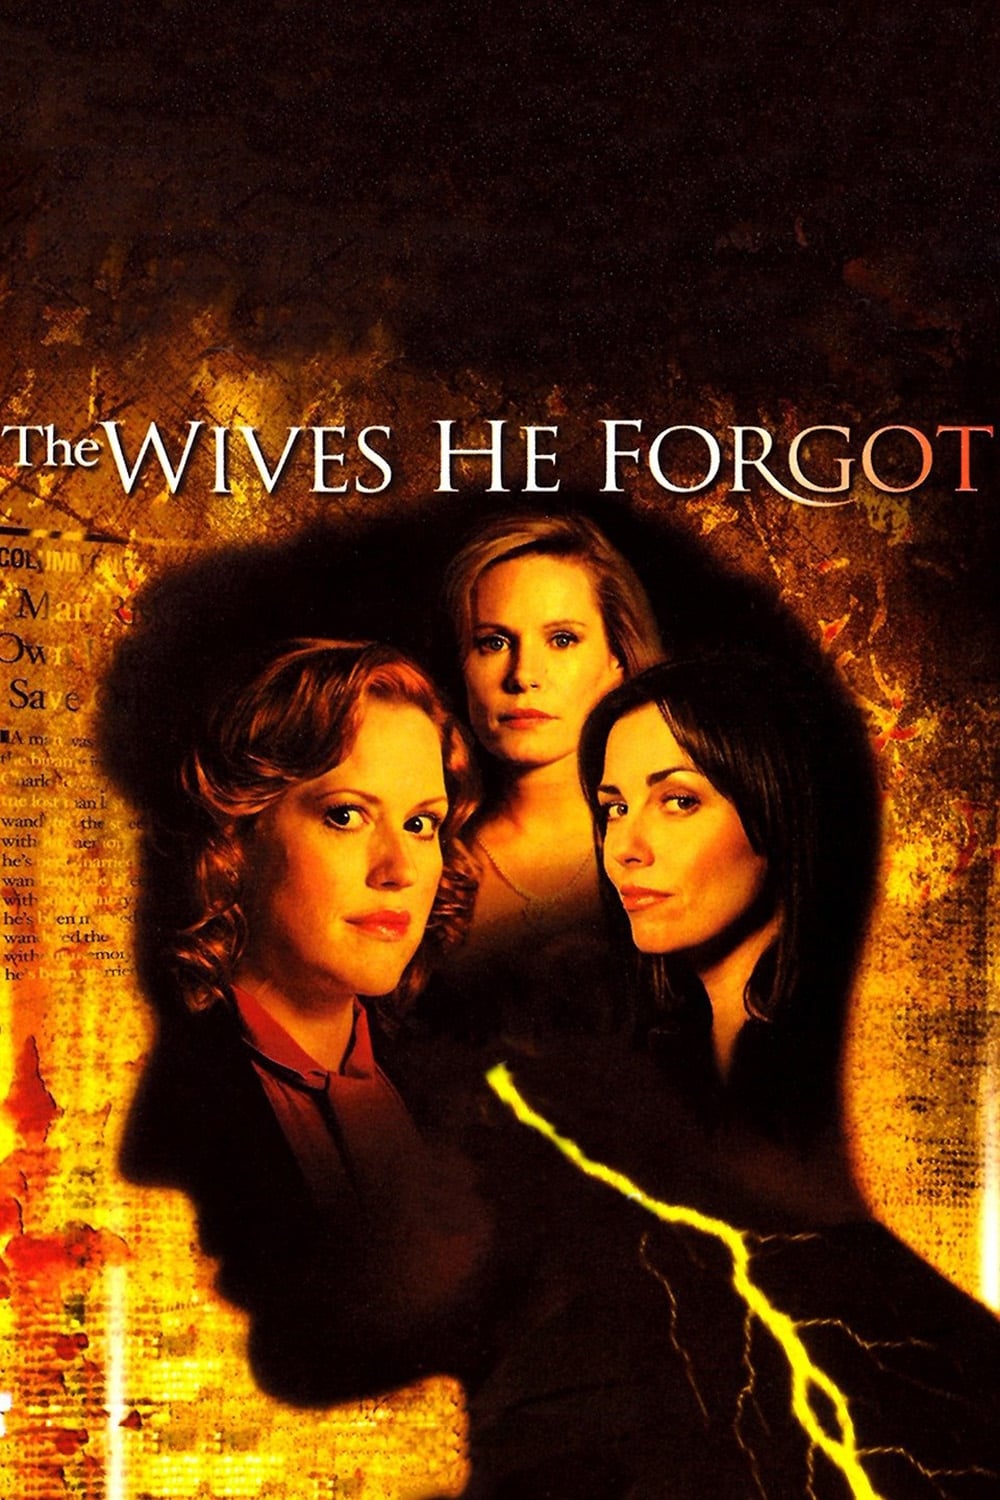 The Wives He Forgot